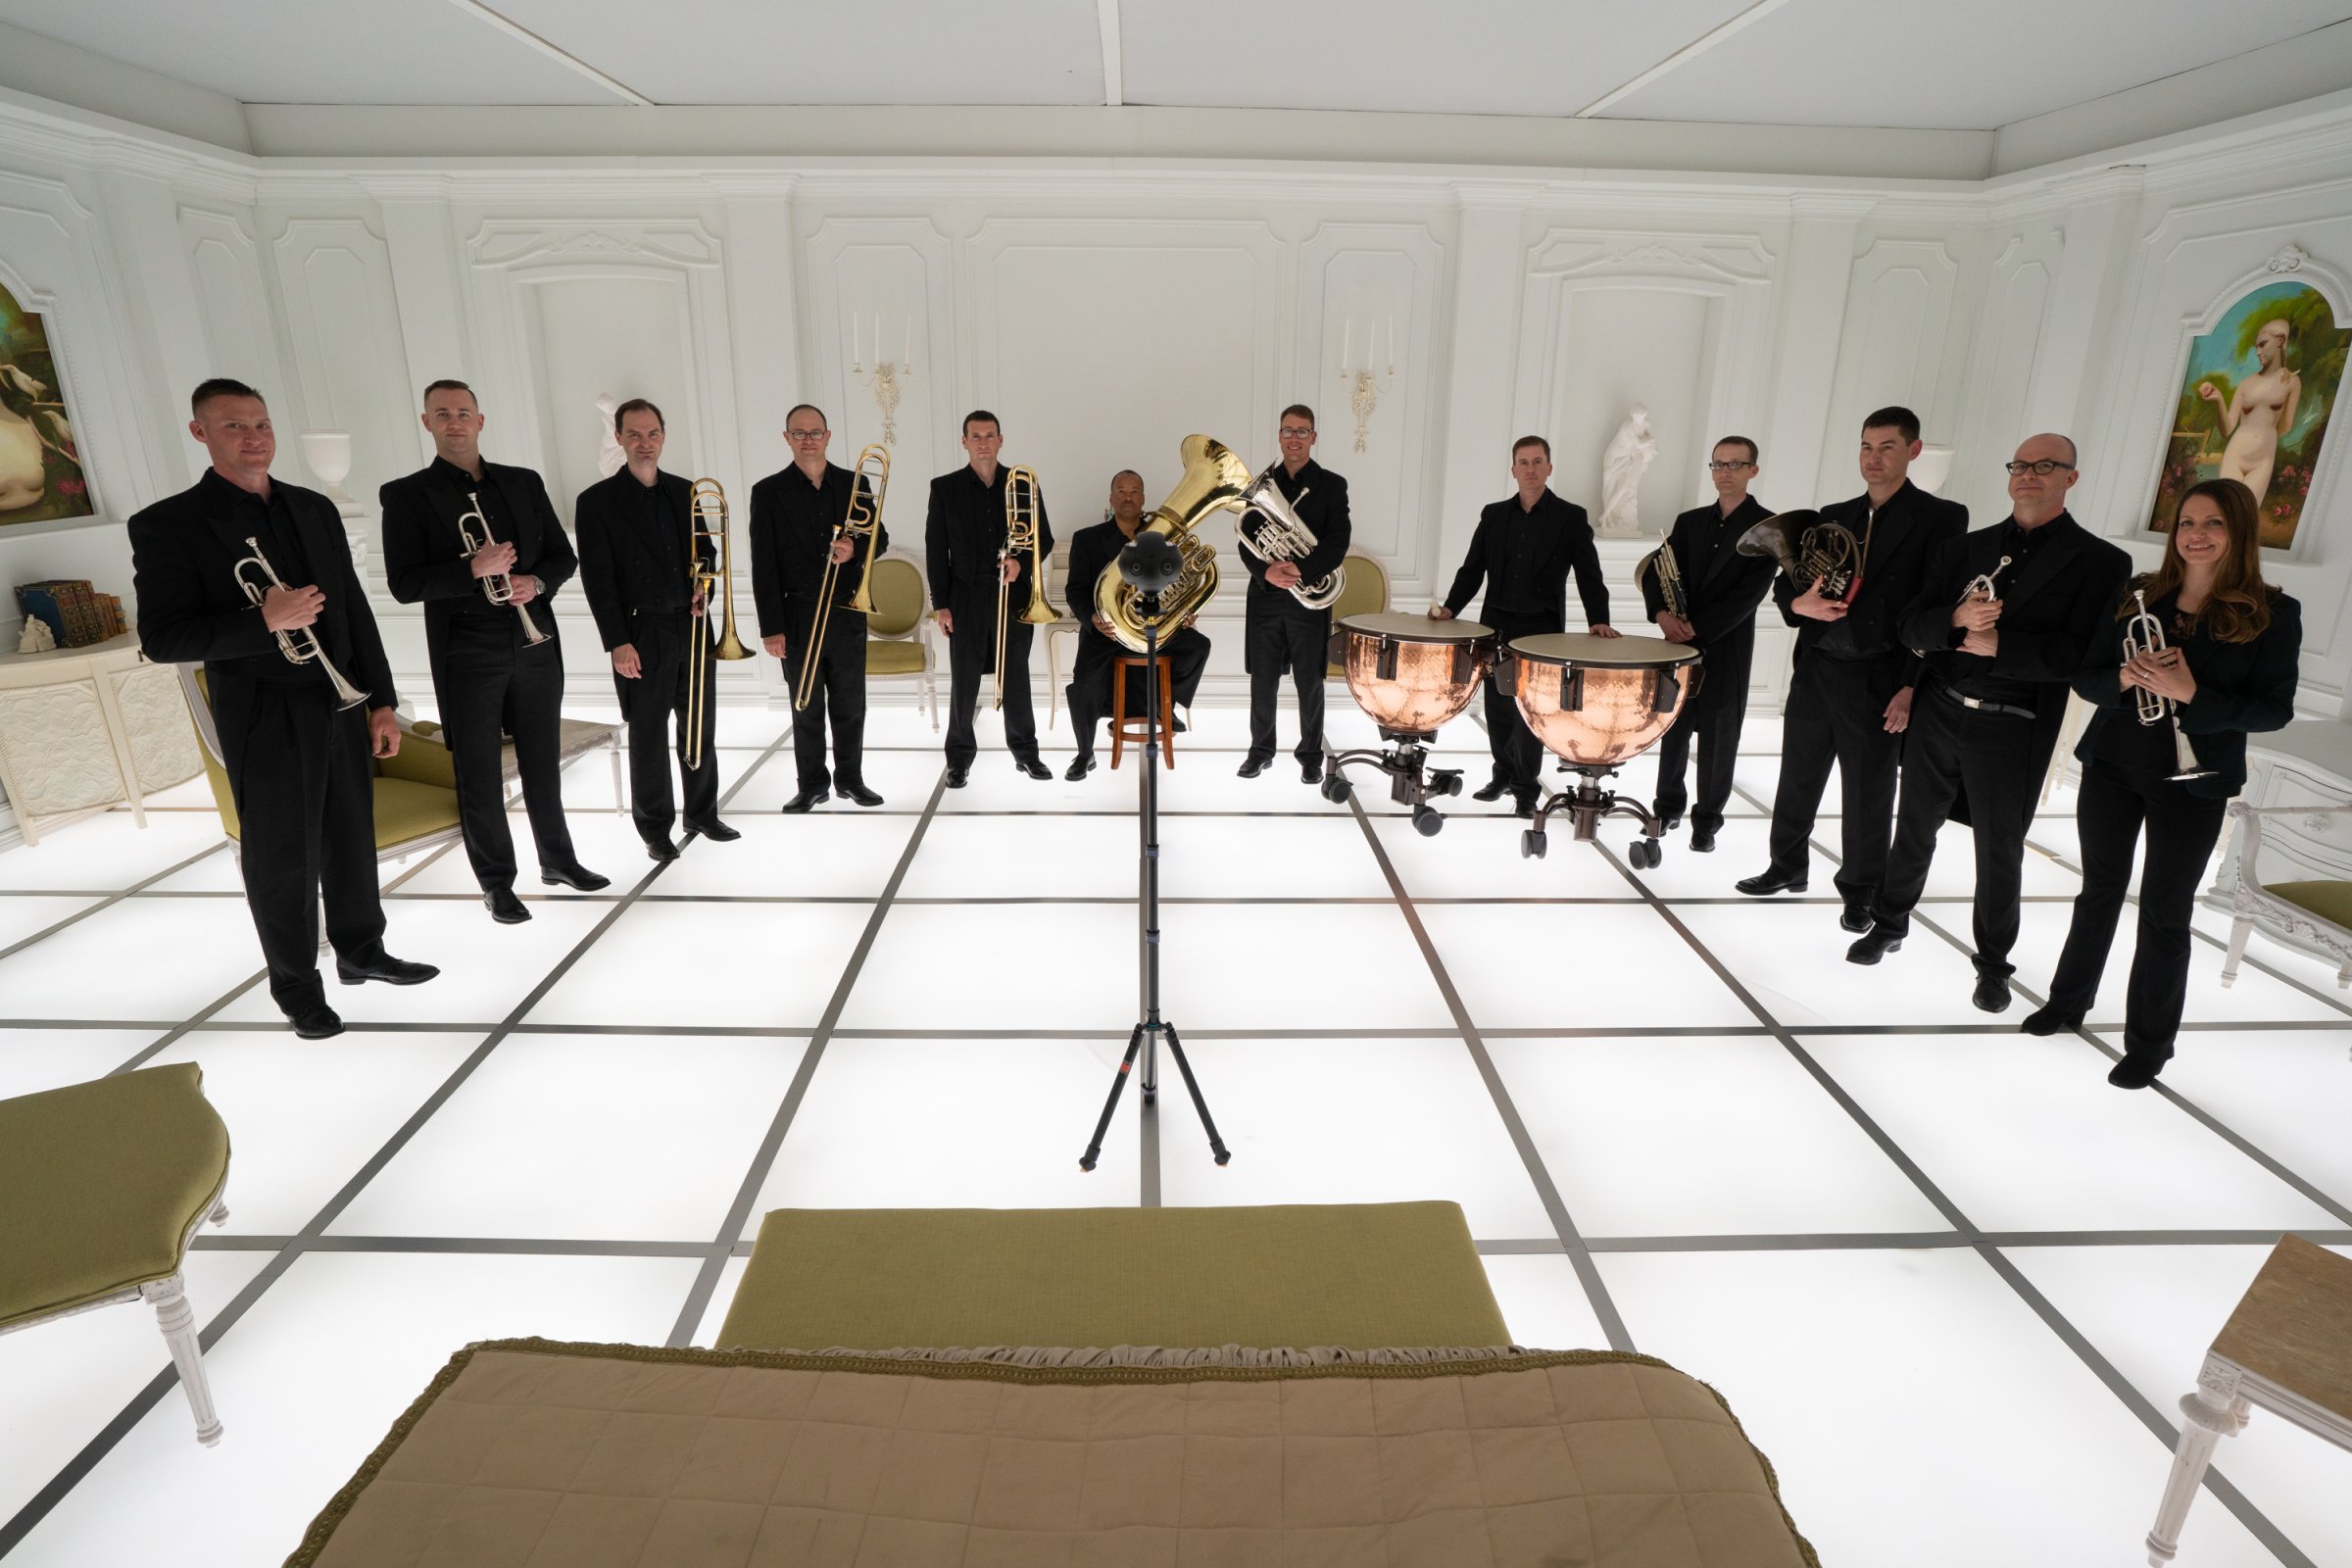 The Barclay Brass band with a 360-degree video camera inside the 2001: A Space Odyssey Immersive Art Exhibit "The Barmecide Feast by Simon Birch” at the National Air and Space Museum in Washington, D.C. on Tuesday, April 24, 2018. Photo by Steve Johnson for TIME.